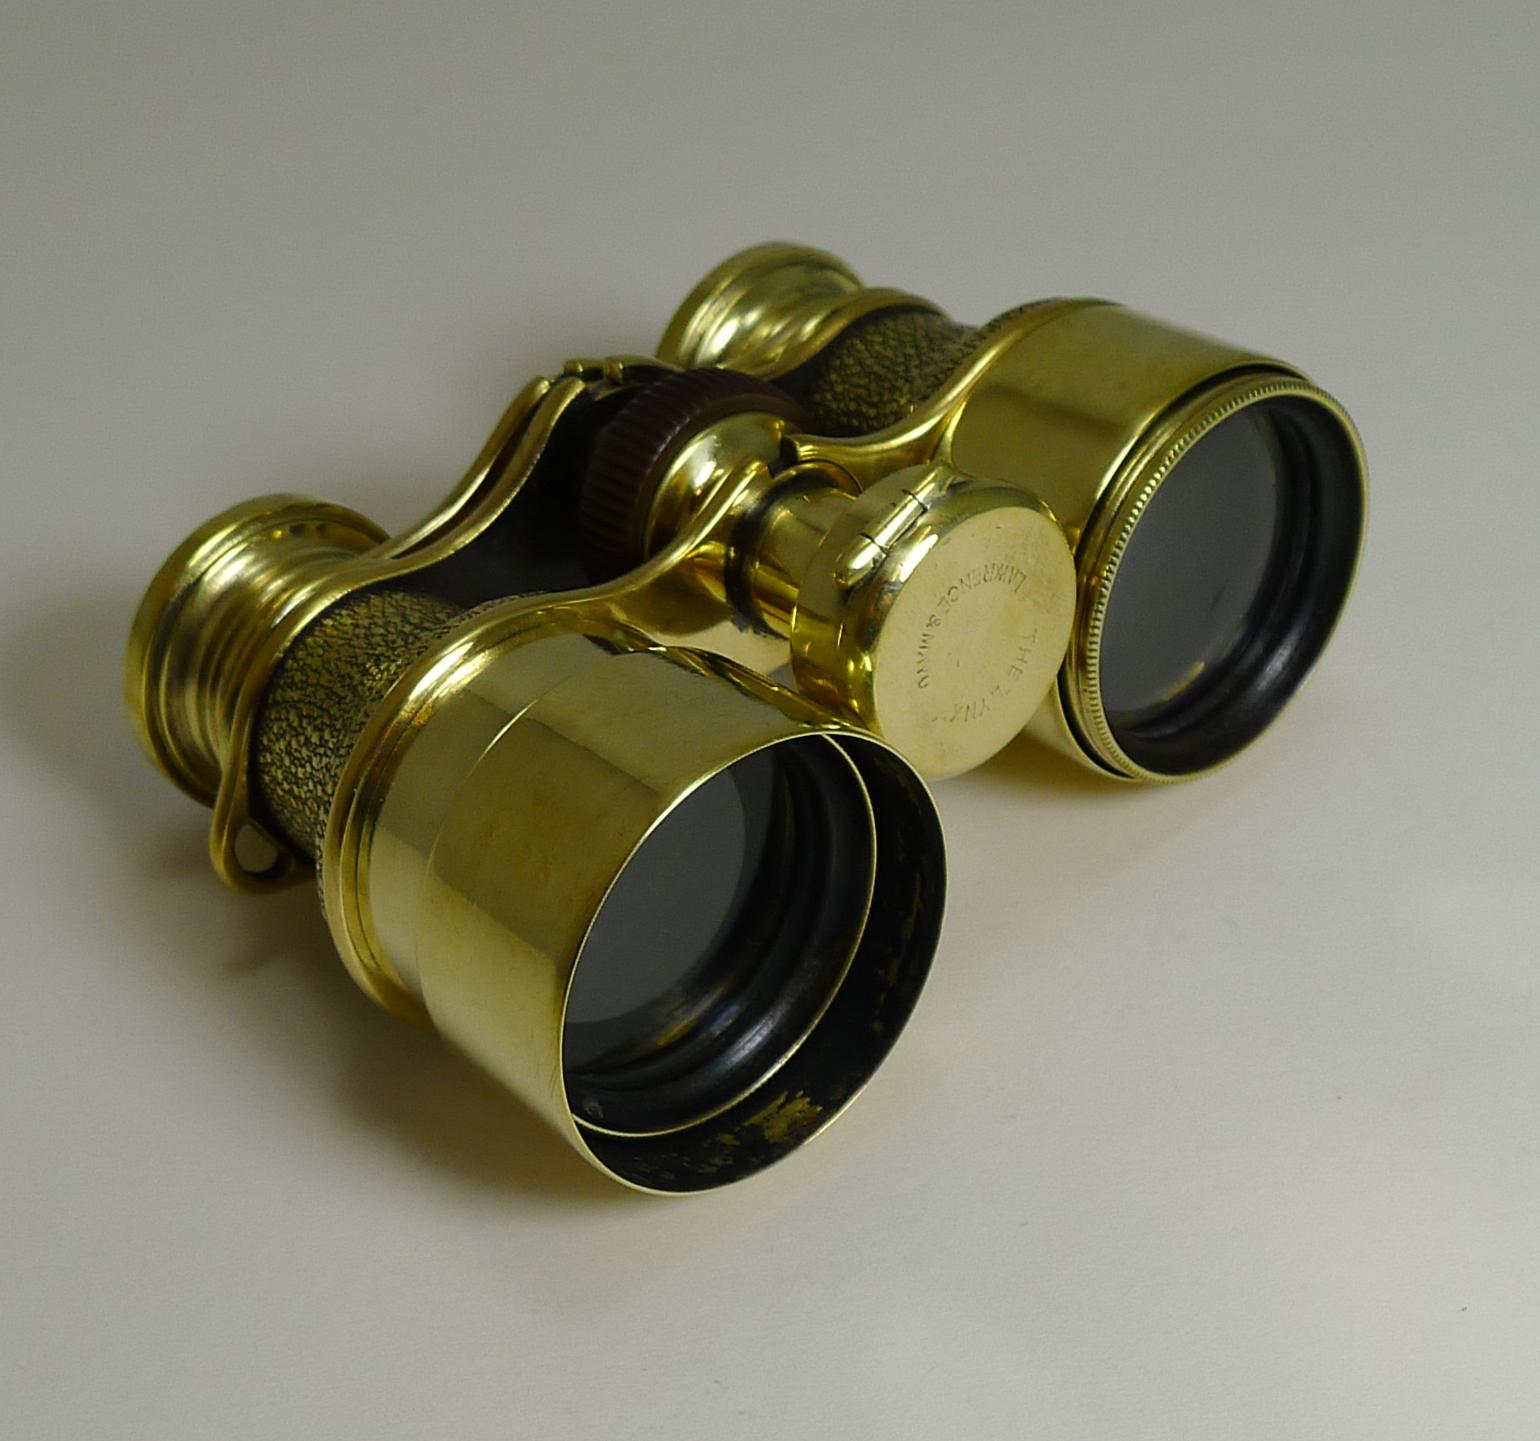 Antique English Field Glasses / Binoculars by Lawrence and Mayo - With Compass 1